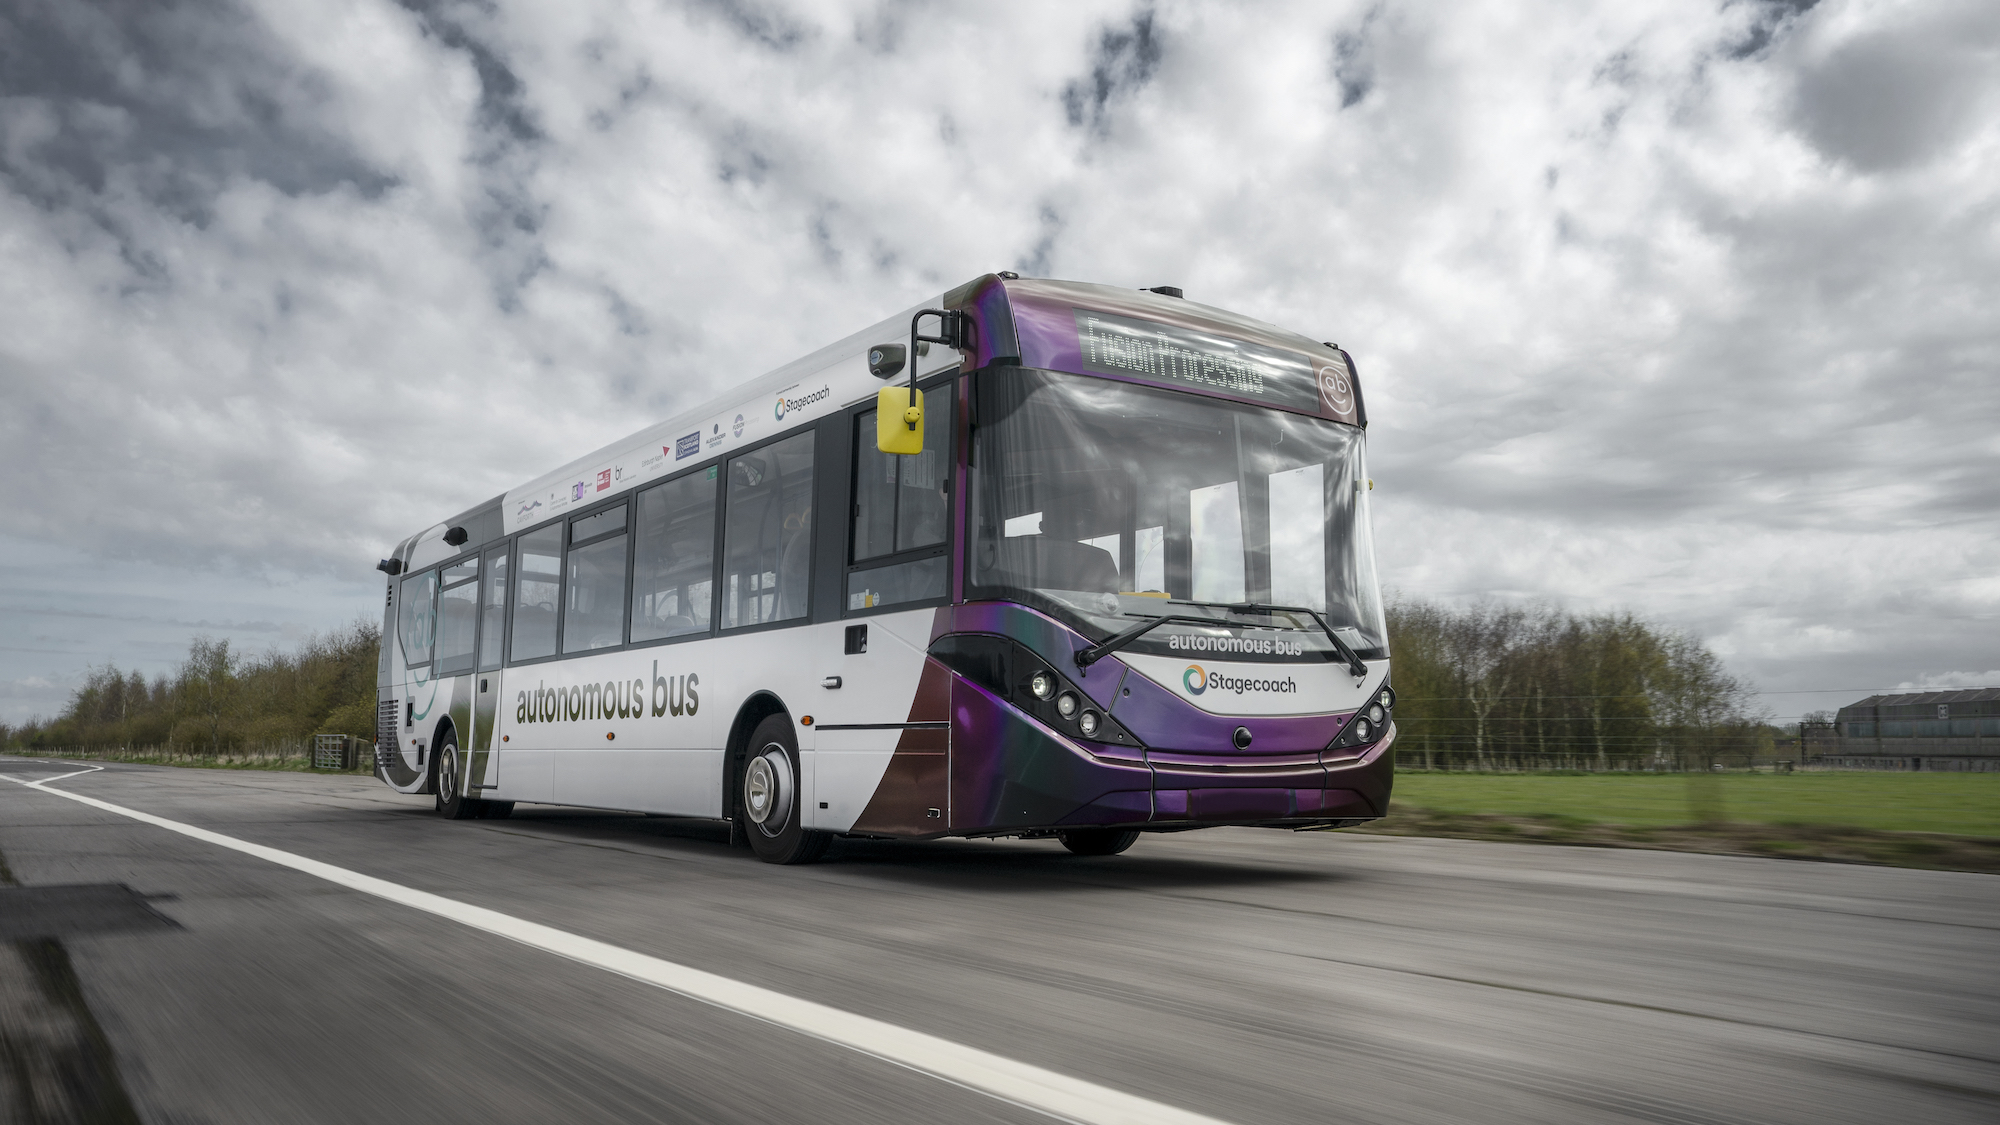 The world’s first self-driving public bus fleet is rolling out in Scotland